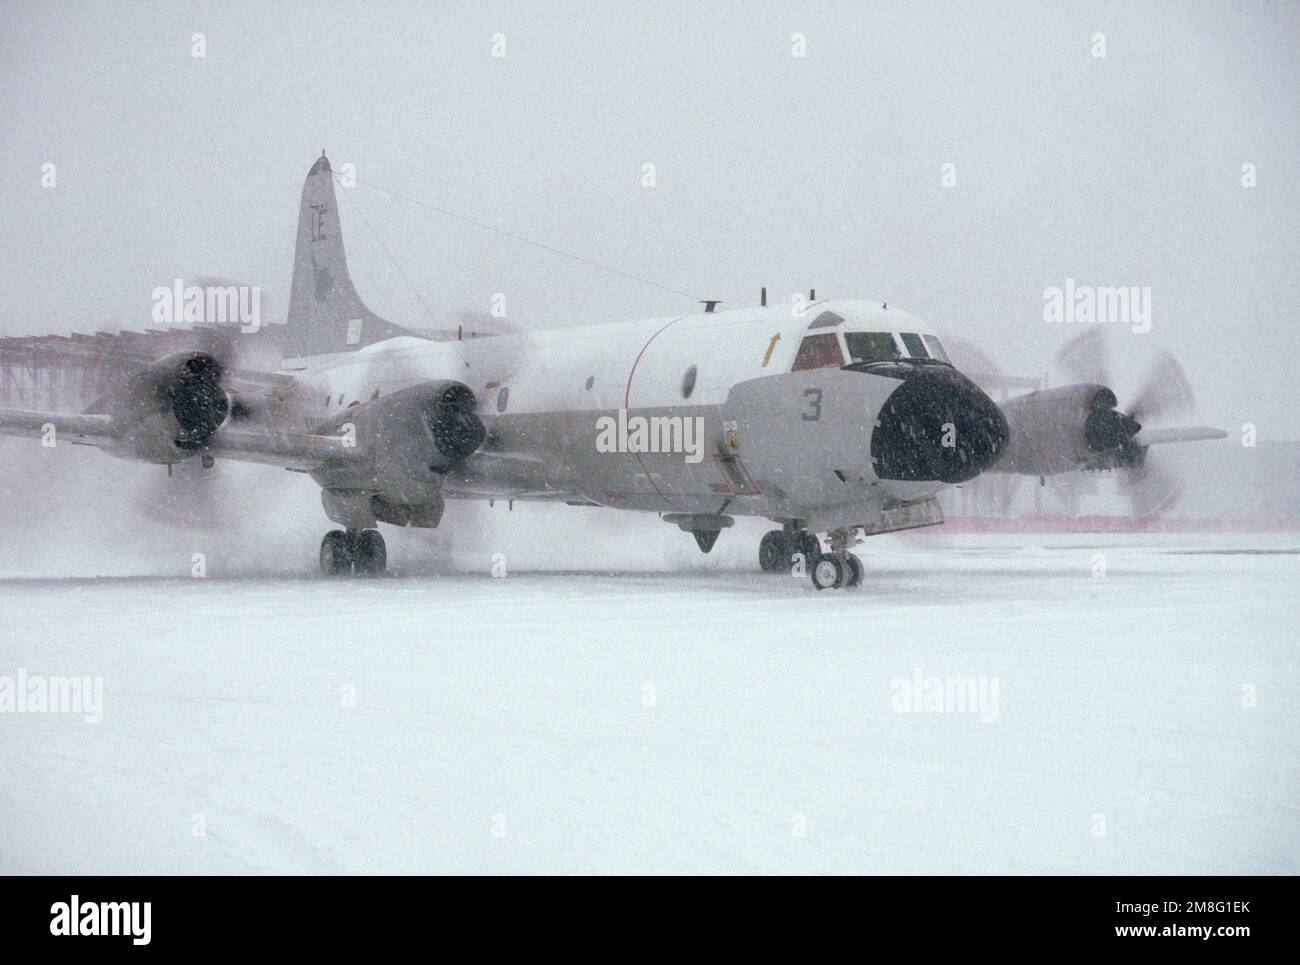 A P-3 Orion anti-submarine aircraft of Patrol Squadron 11 (VP-11) taxis into position for take-off during a New England snow storm. Base: Naval Air Station, Brunswick State: Maine(ME) Country: United States Of America (USA) Stock Photo